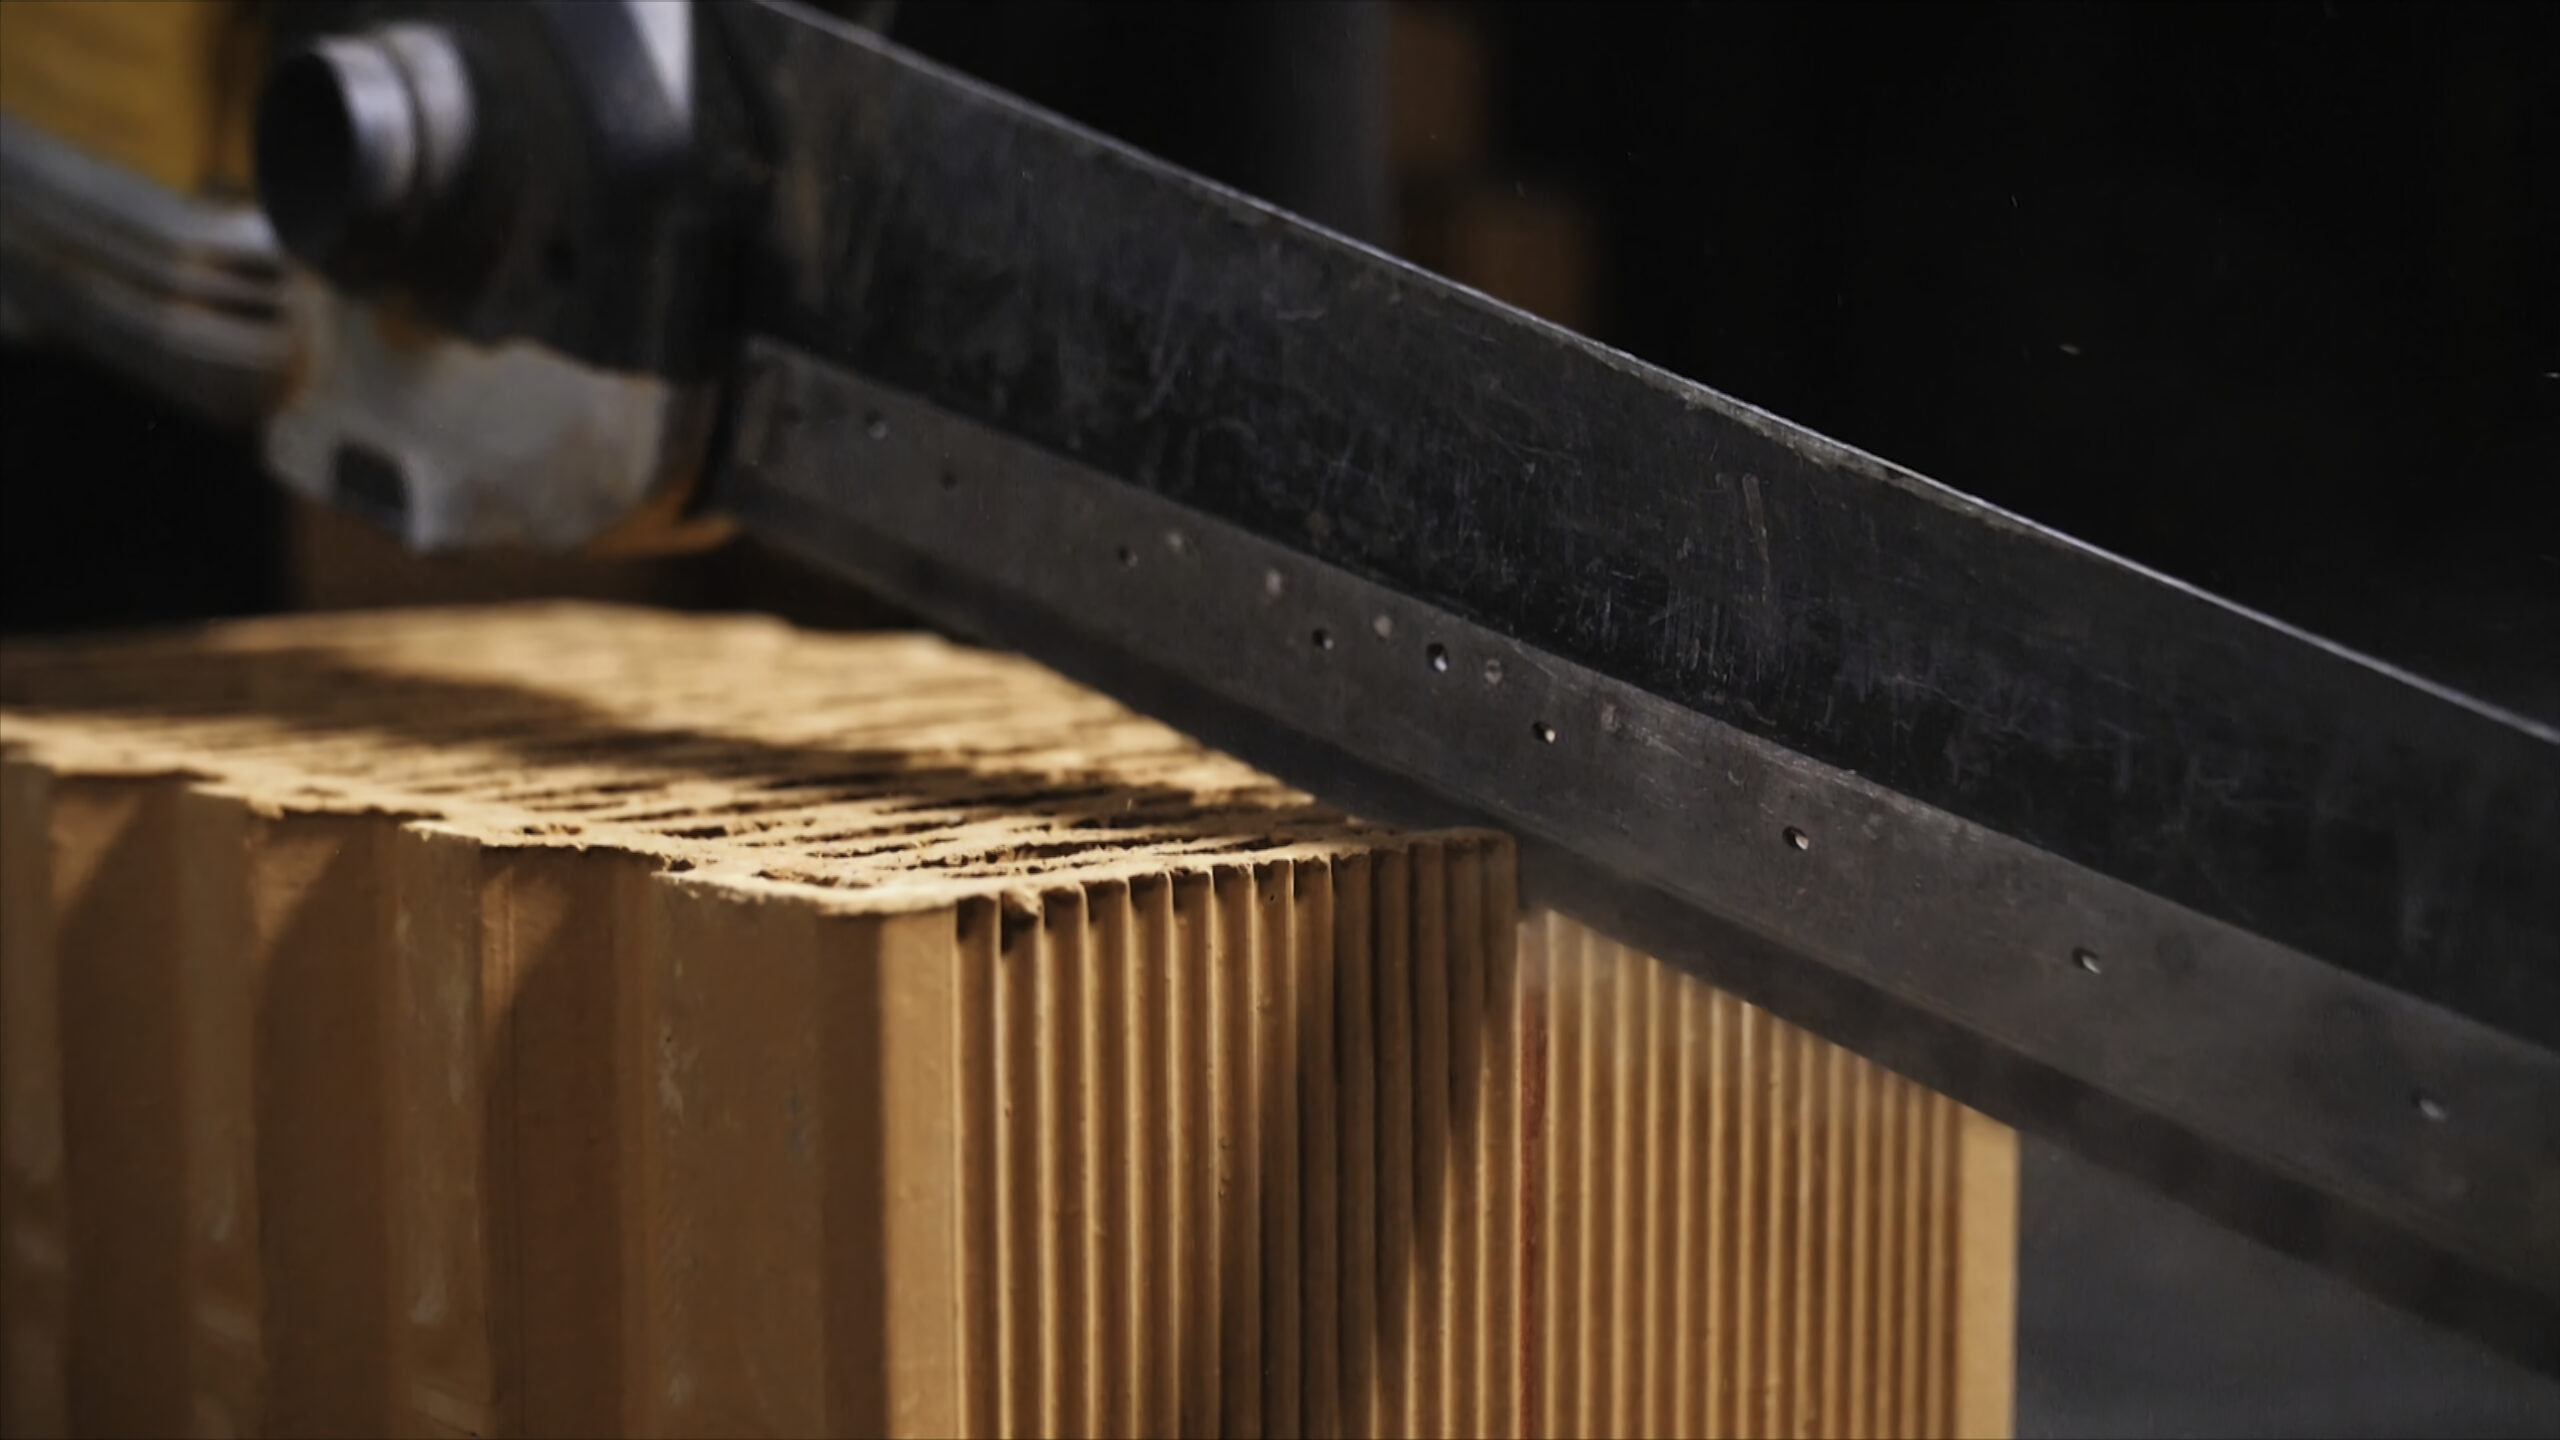 Professional saw for cutting bricks. Stock footage.Close-up of unknown worker using a professional saw cutting the brick at construction site.